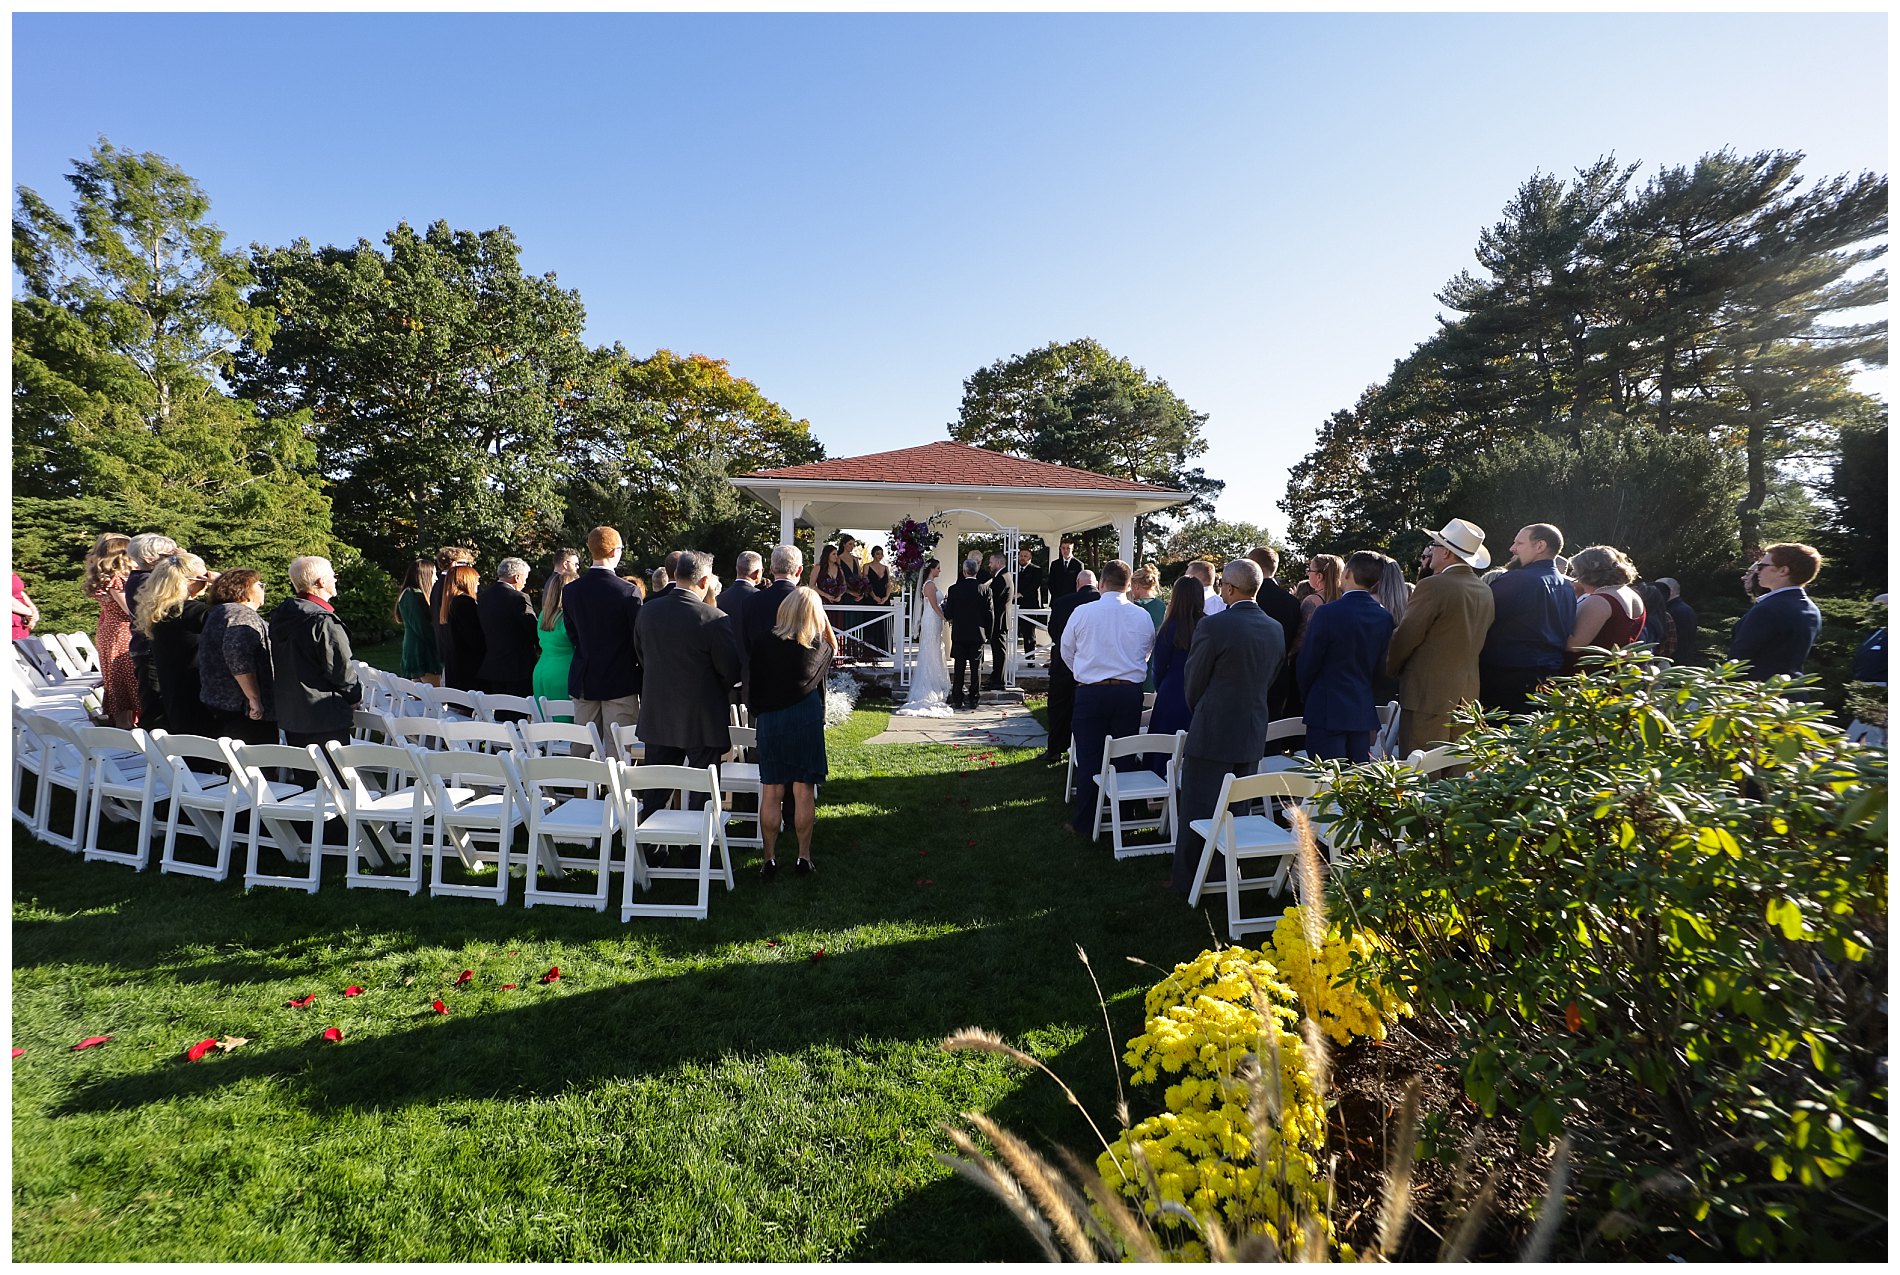 The gazebo ceremony lawn at the Wentworth by the Sea hotel in New Hampshire